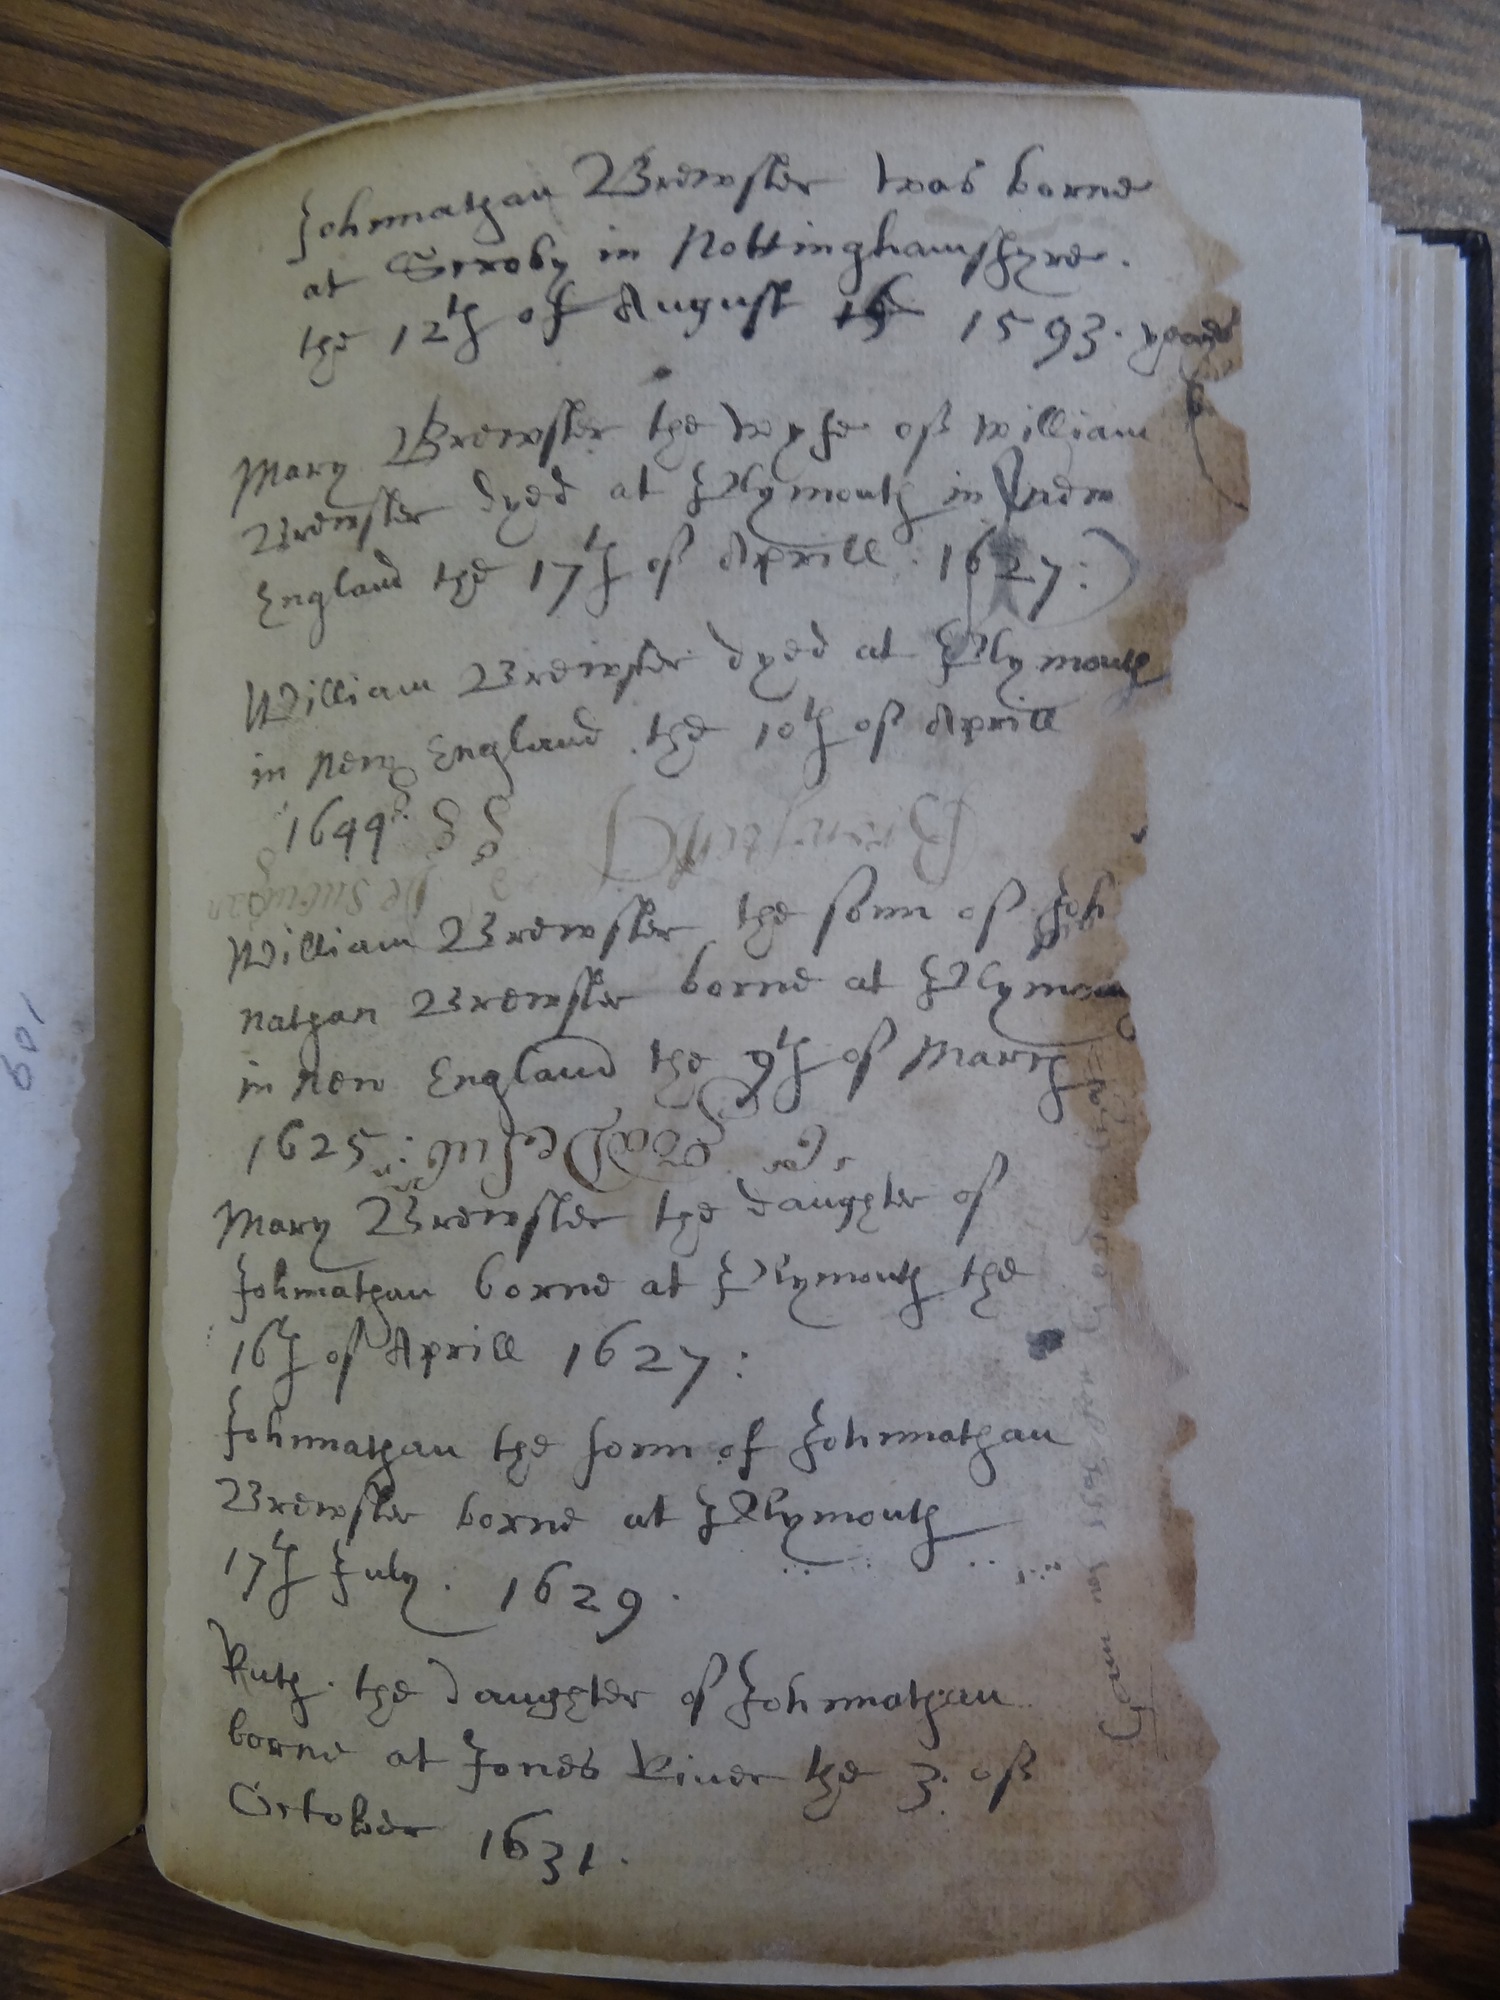  A page from the "Brewster Book," containing some of the family birth and death records for William and Mary Brewster and their children. 